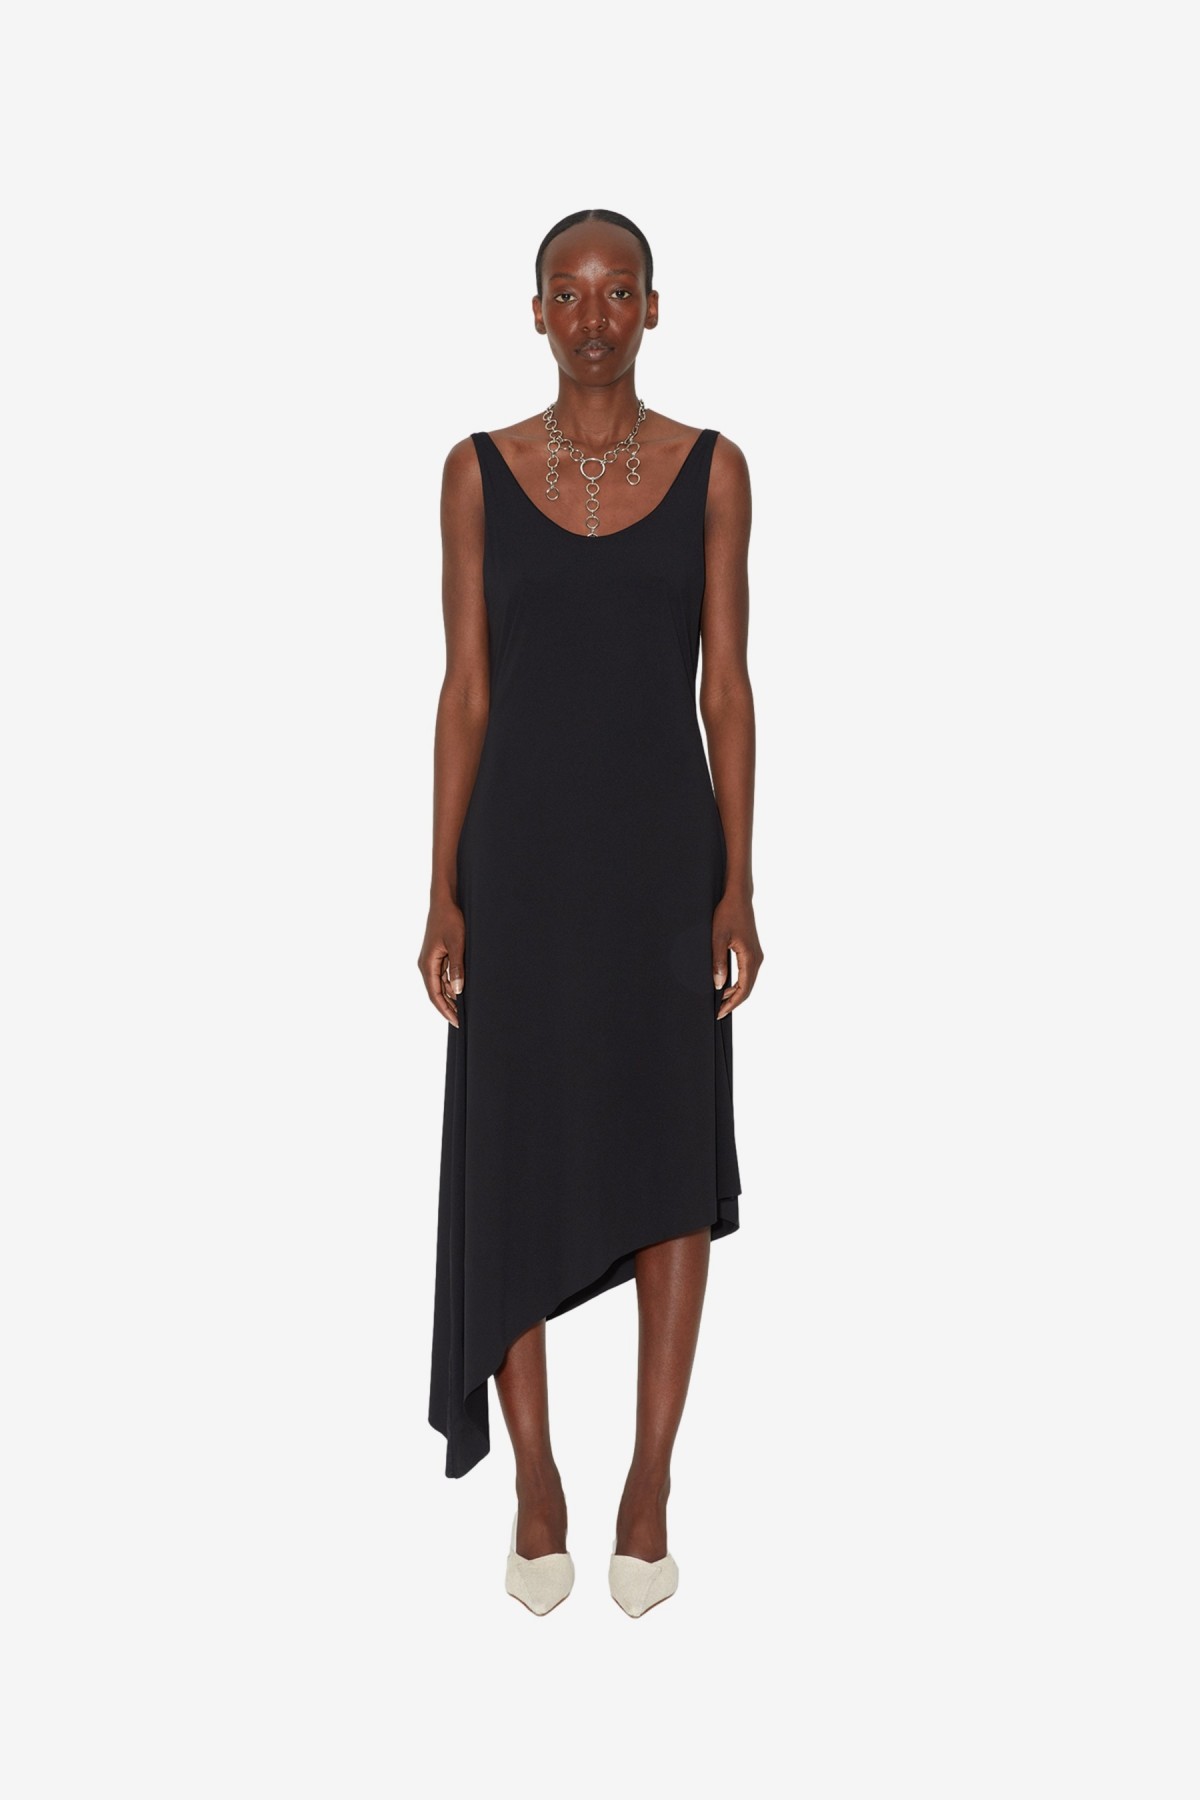 Our Legacy Hang Dress in Black Super Sport Jersey